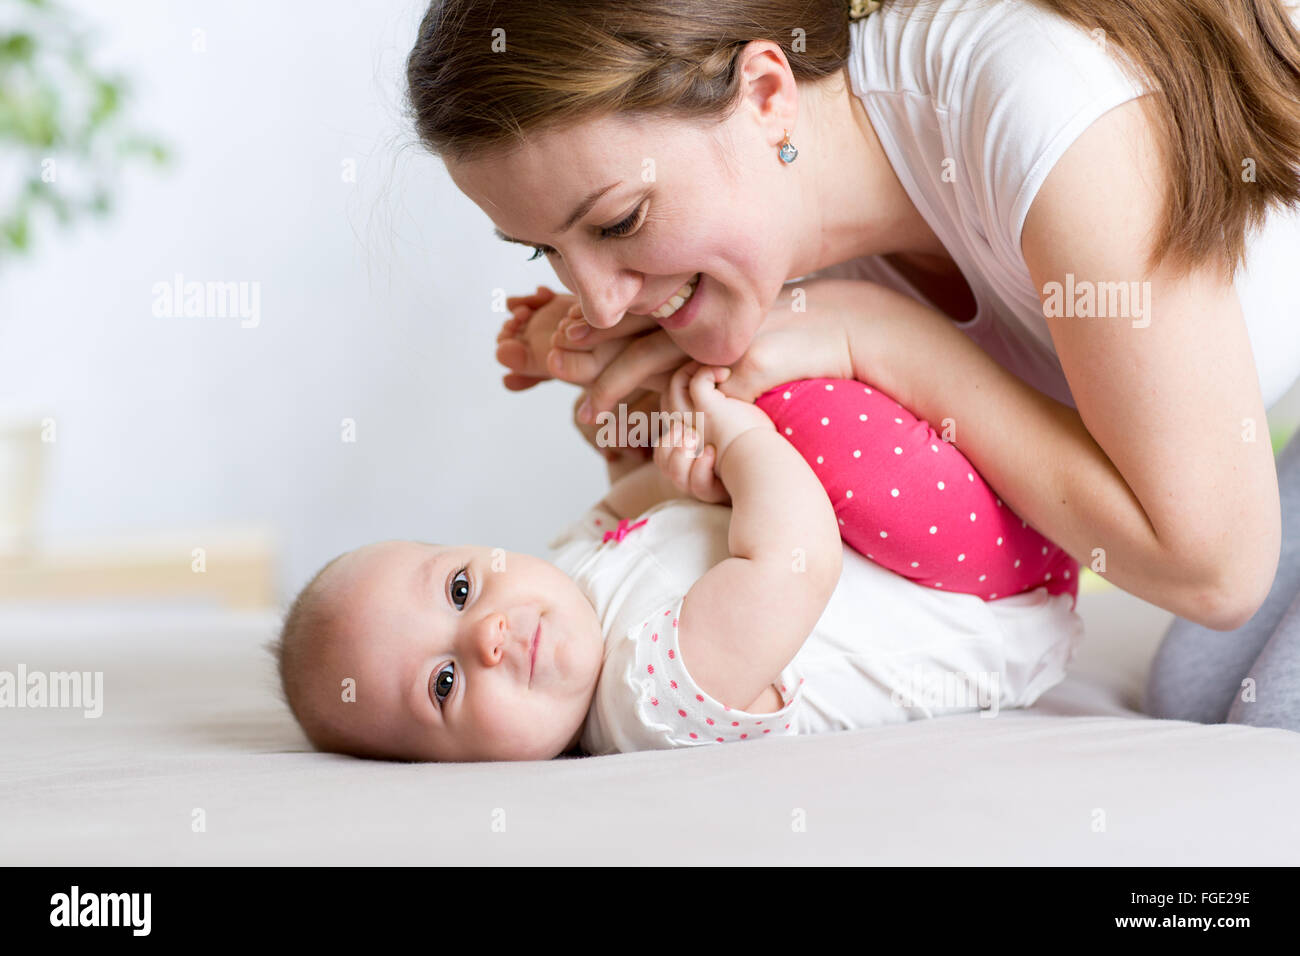 Mother and Baby having fun pastime together Stock Photo